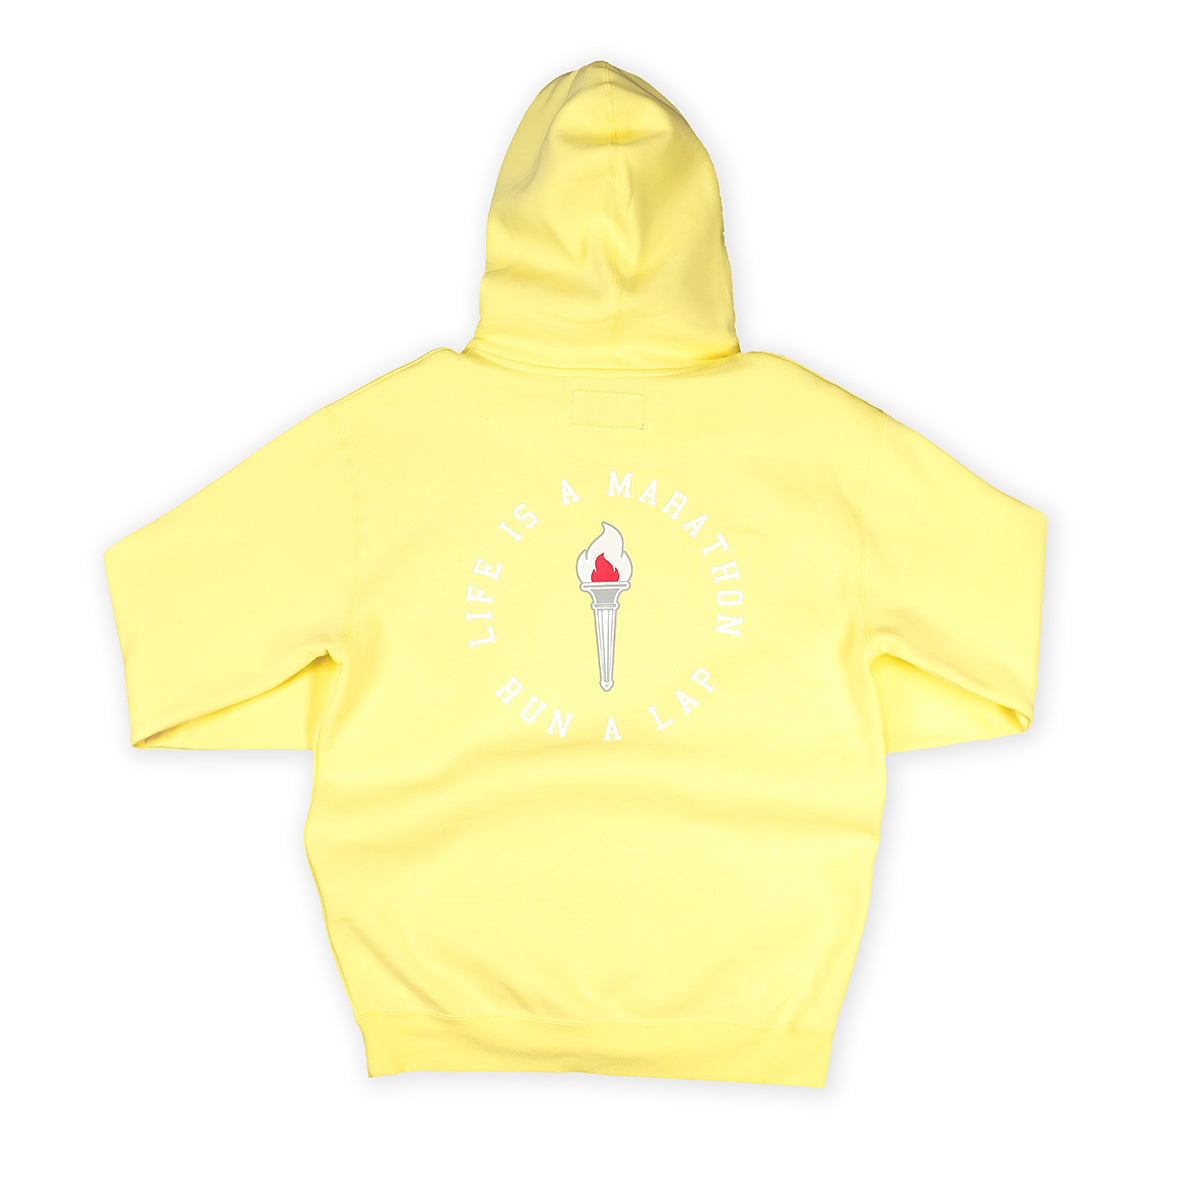 Victory Torch Hoodie - Soft Yellow - Back